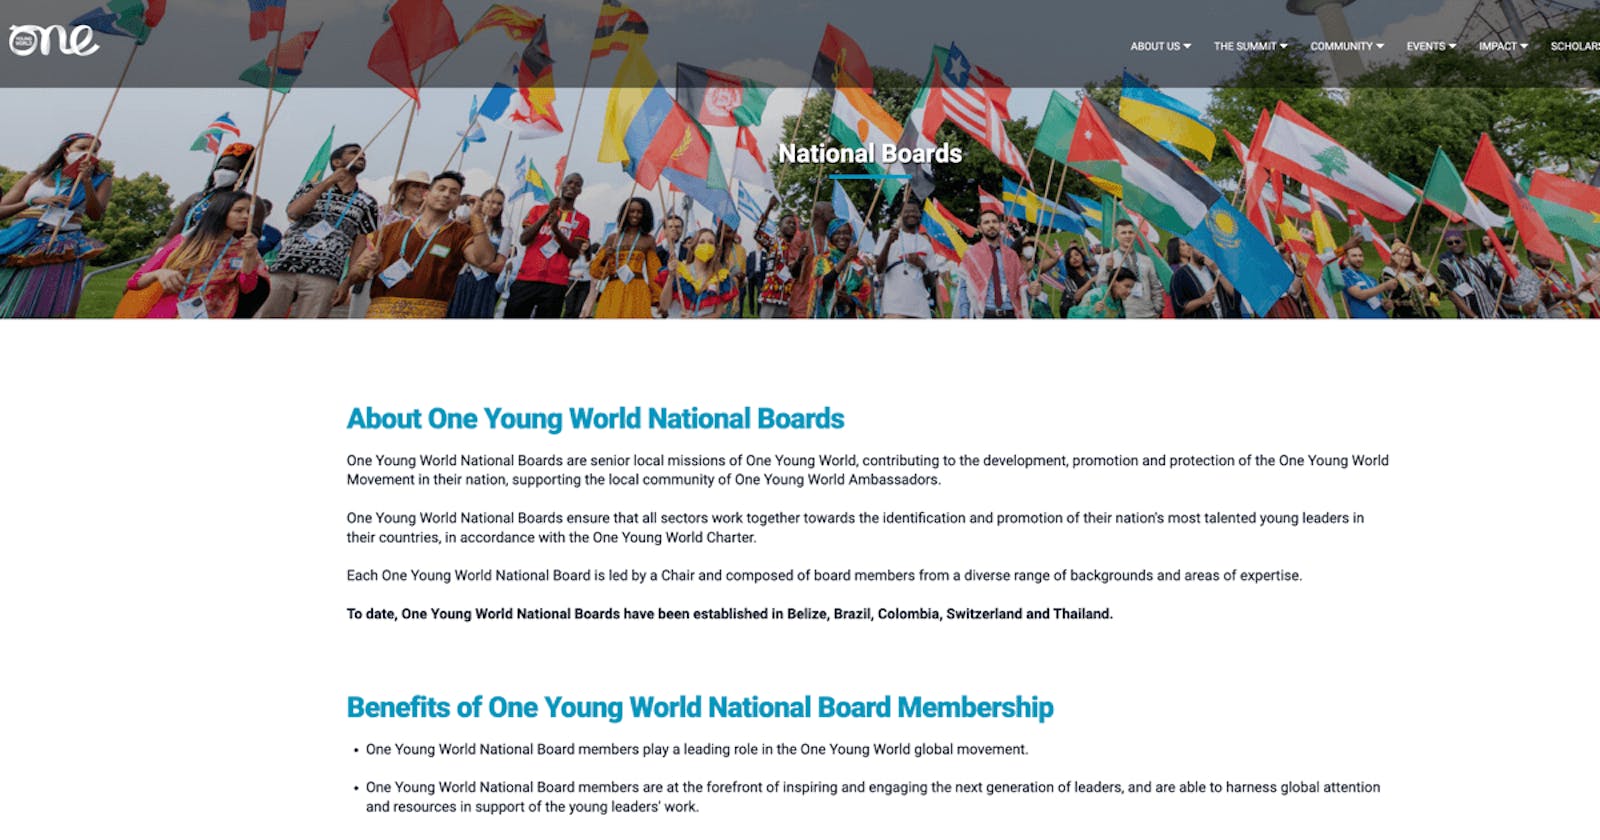 One Young World: National Boards Project